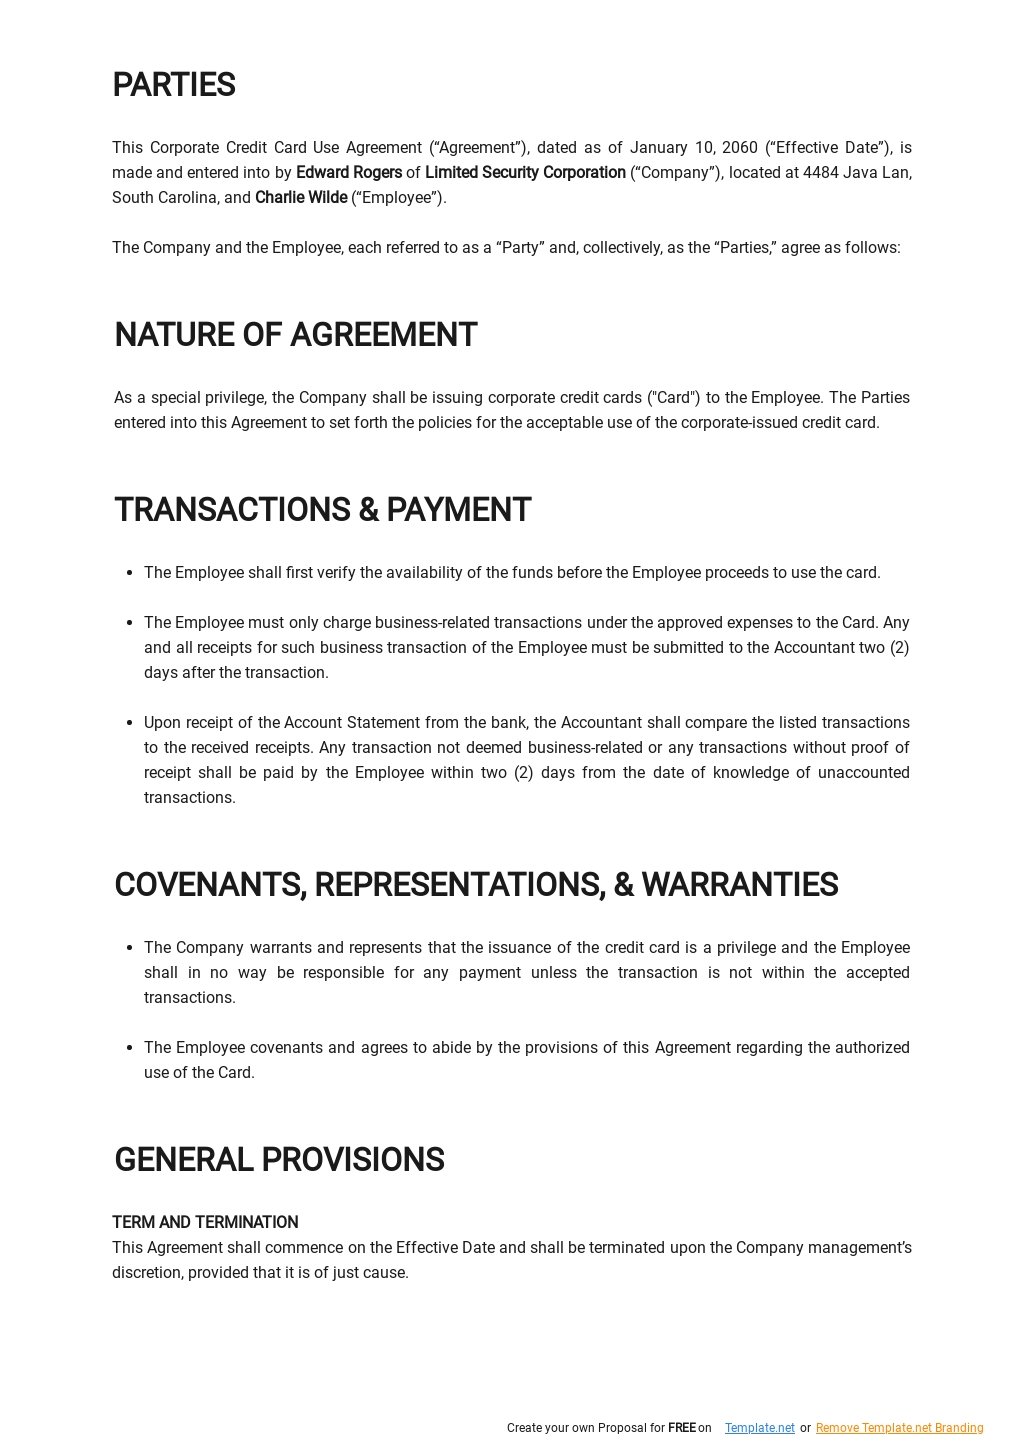 Corporate Credit Card Use Agreement Template - Google Docs, Word With Regard To Corporate Credit Card Agreement Template